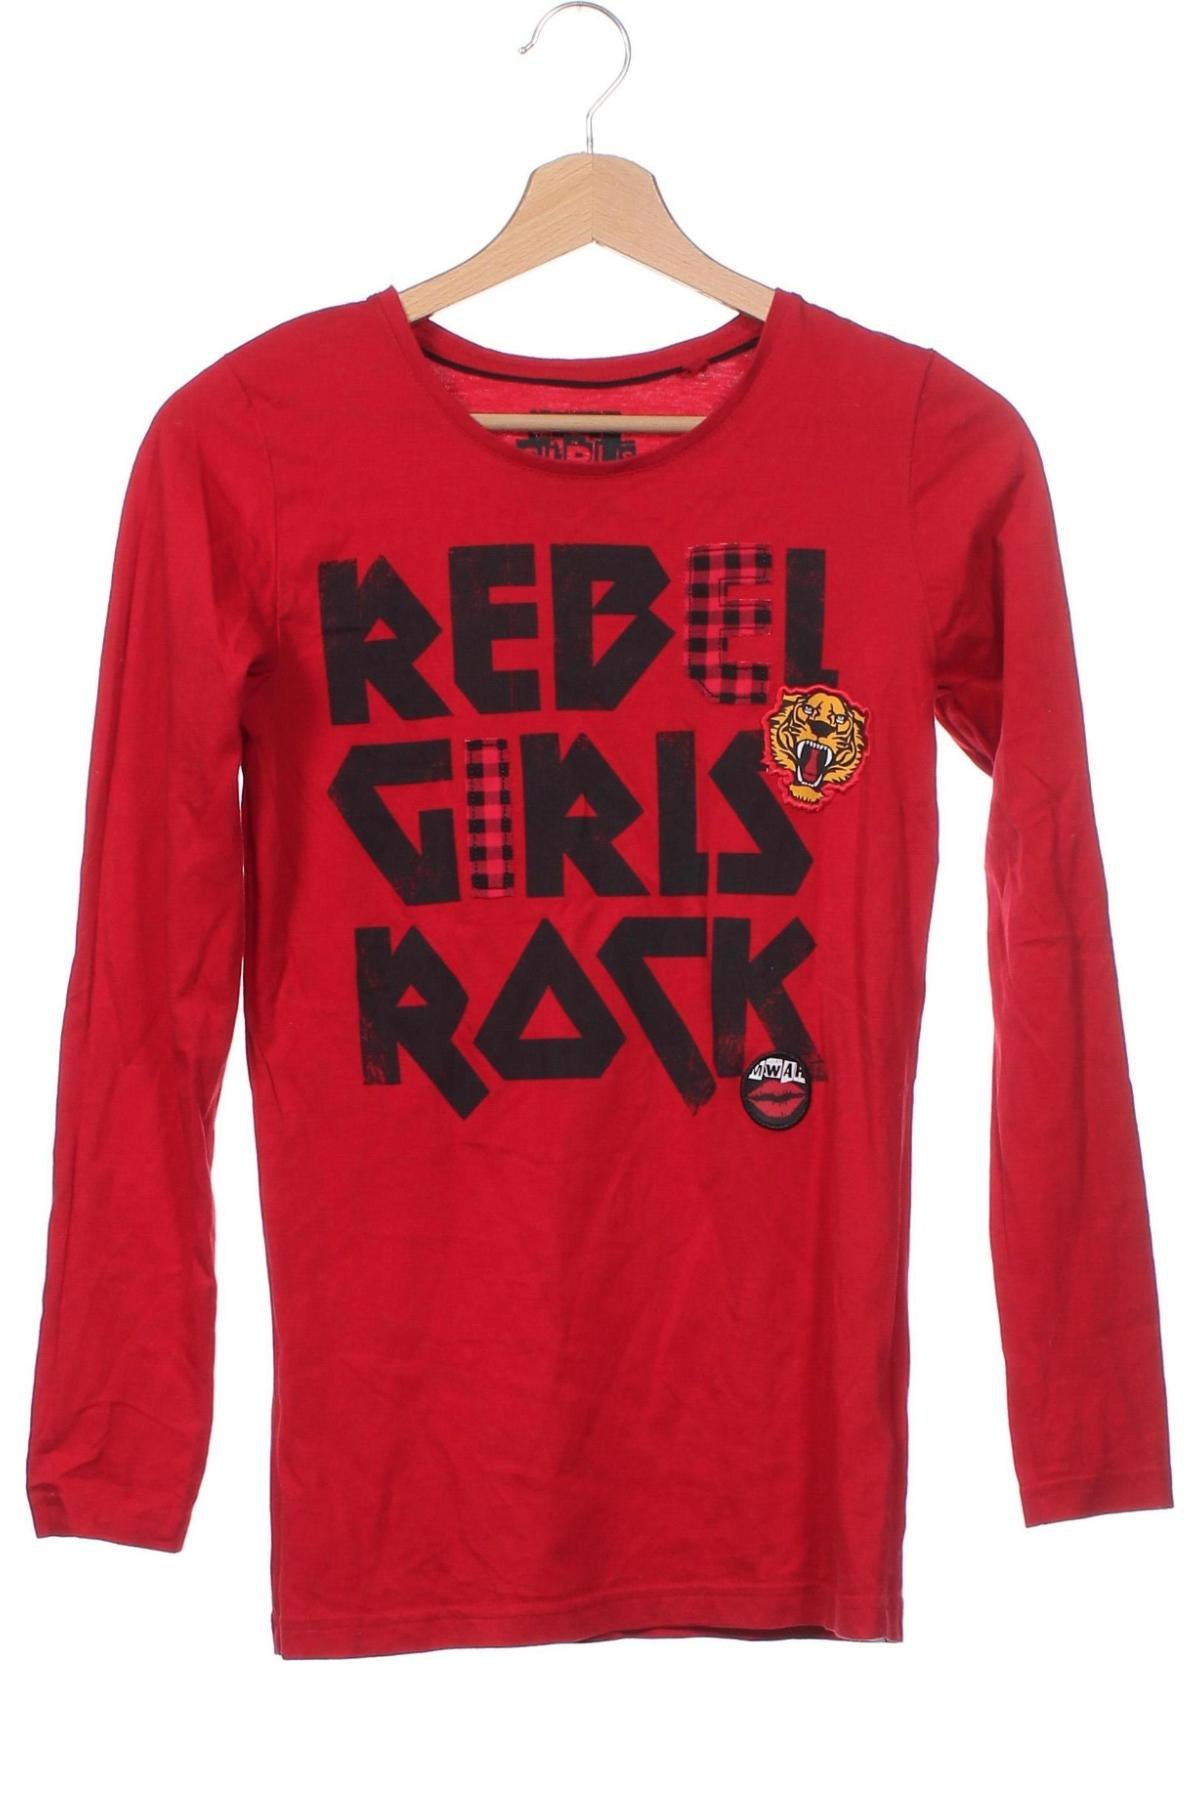 Kinder Shirt Here+There, Größe 12-13y/ 158-164 cm, Farbe Rot, Preis € 2,71